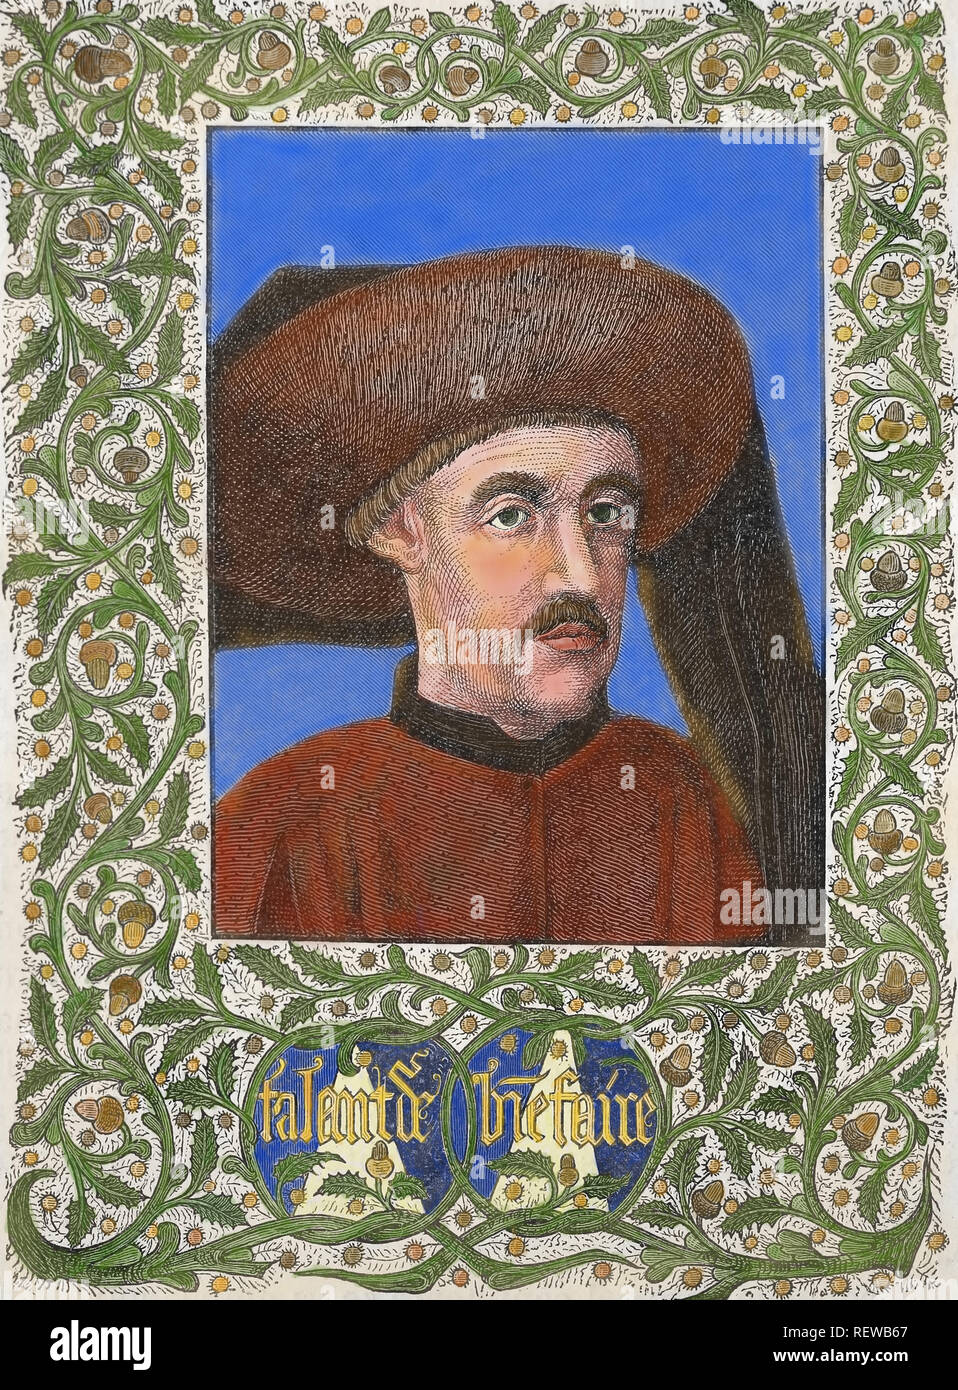 Portrait of Infante Enrique. Henry the Navigator (1394-1460), prince of Portugal. Great explorer. Empire of Portugal. Colored engraving. Stock Photo